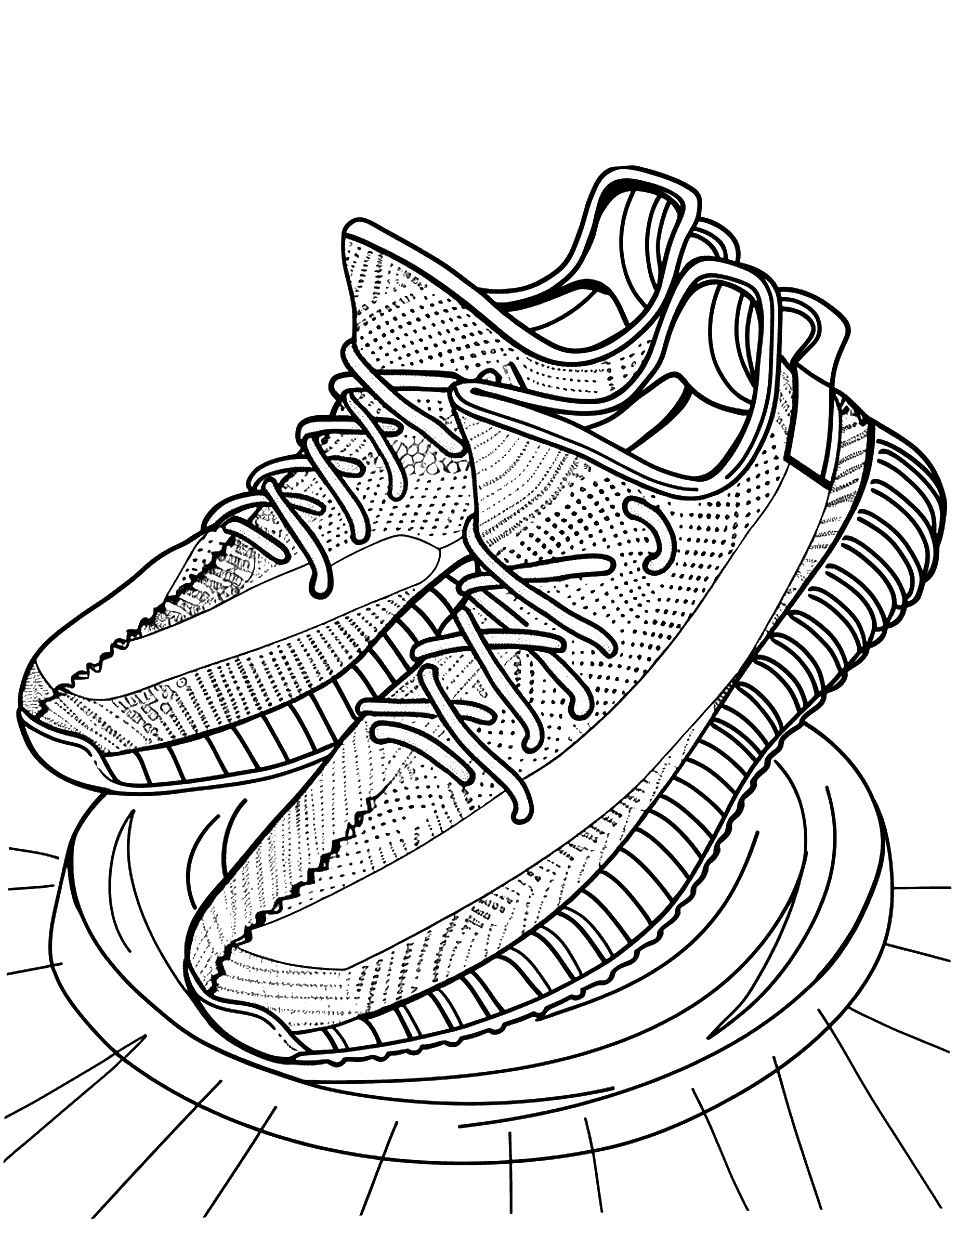 Yeezy Sneakers on Display Shoe Coloring Page - Yeezy sneakers positioned prominently with a minimalist white background.